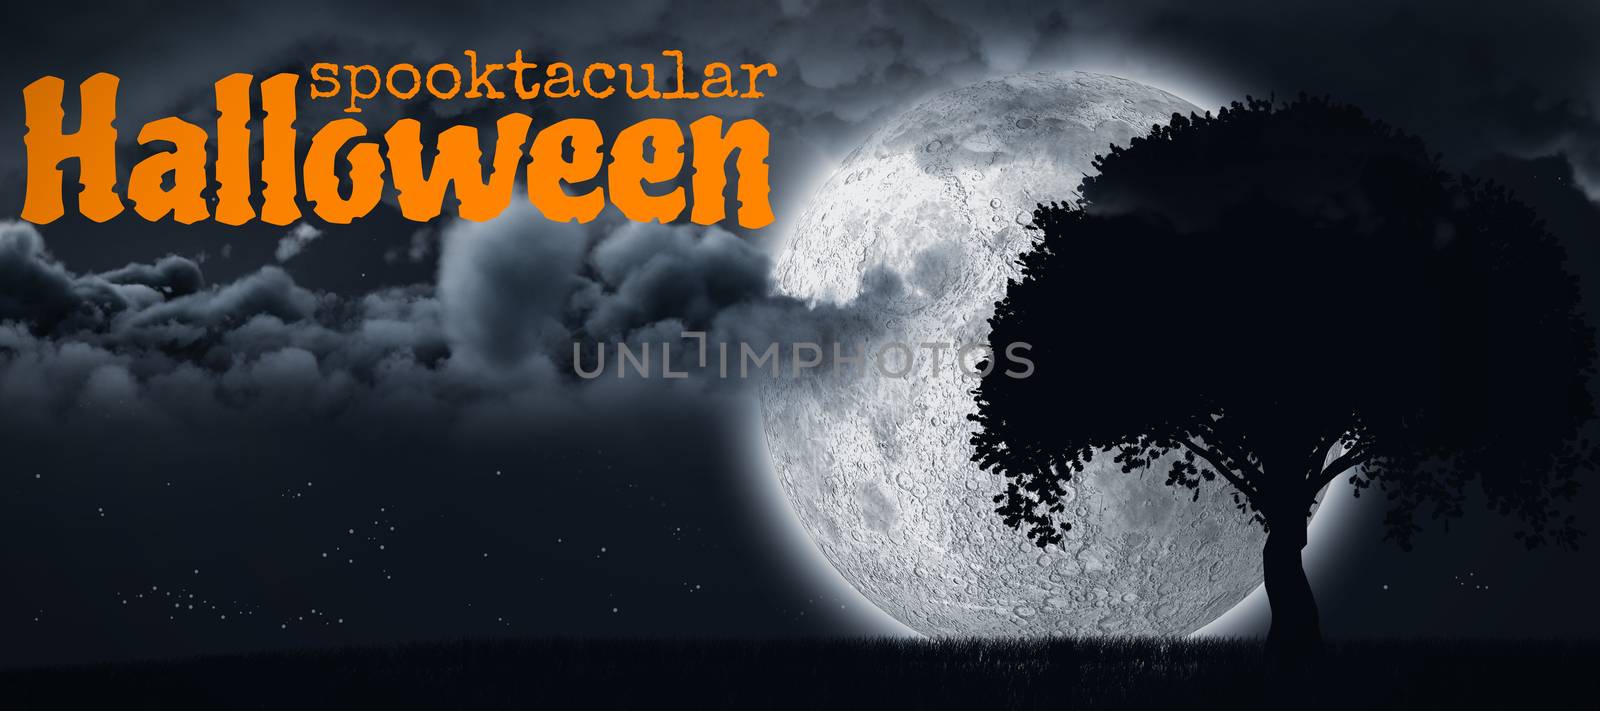 Composite image of graphic image of spooktacular halloween text by Wavebreakmedia